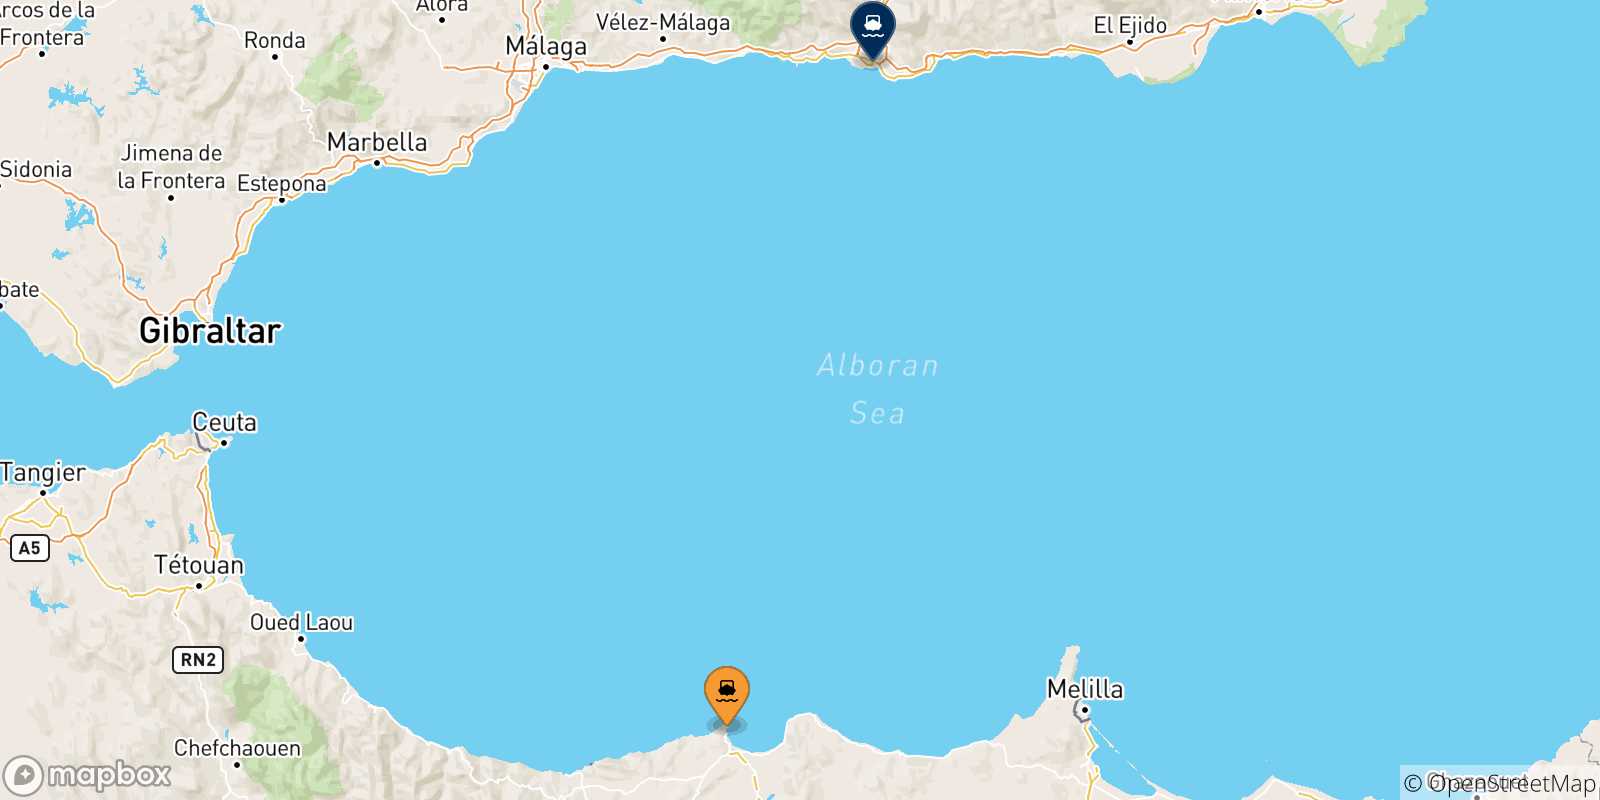 Map of the possible routes between Al Hoceima and Spain